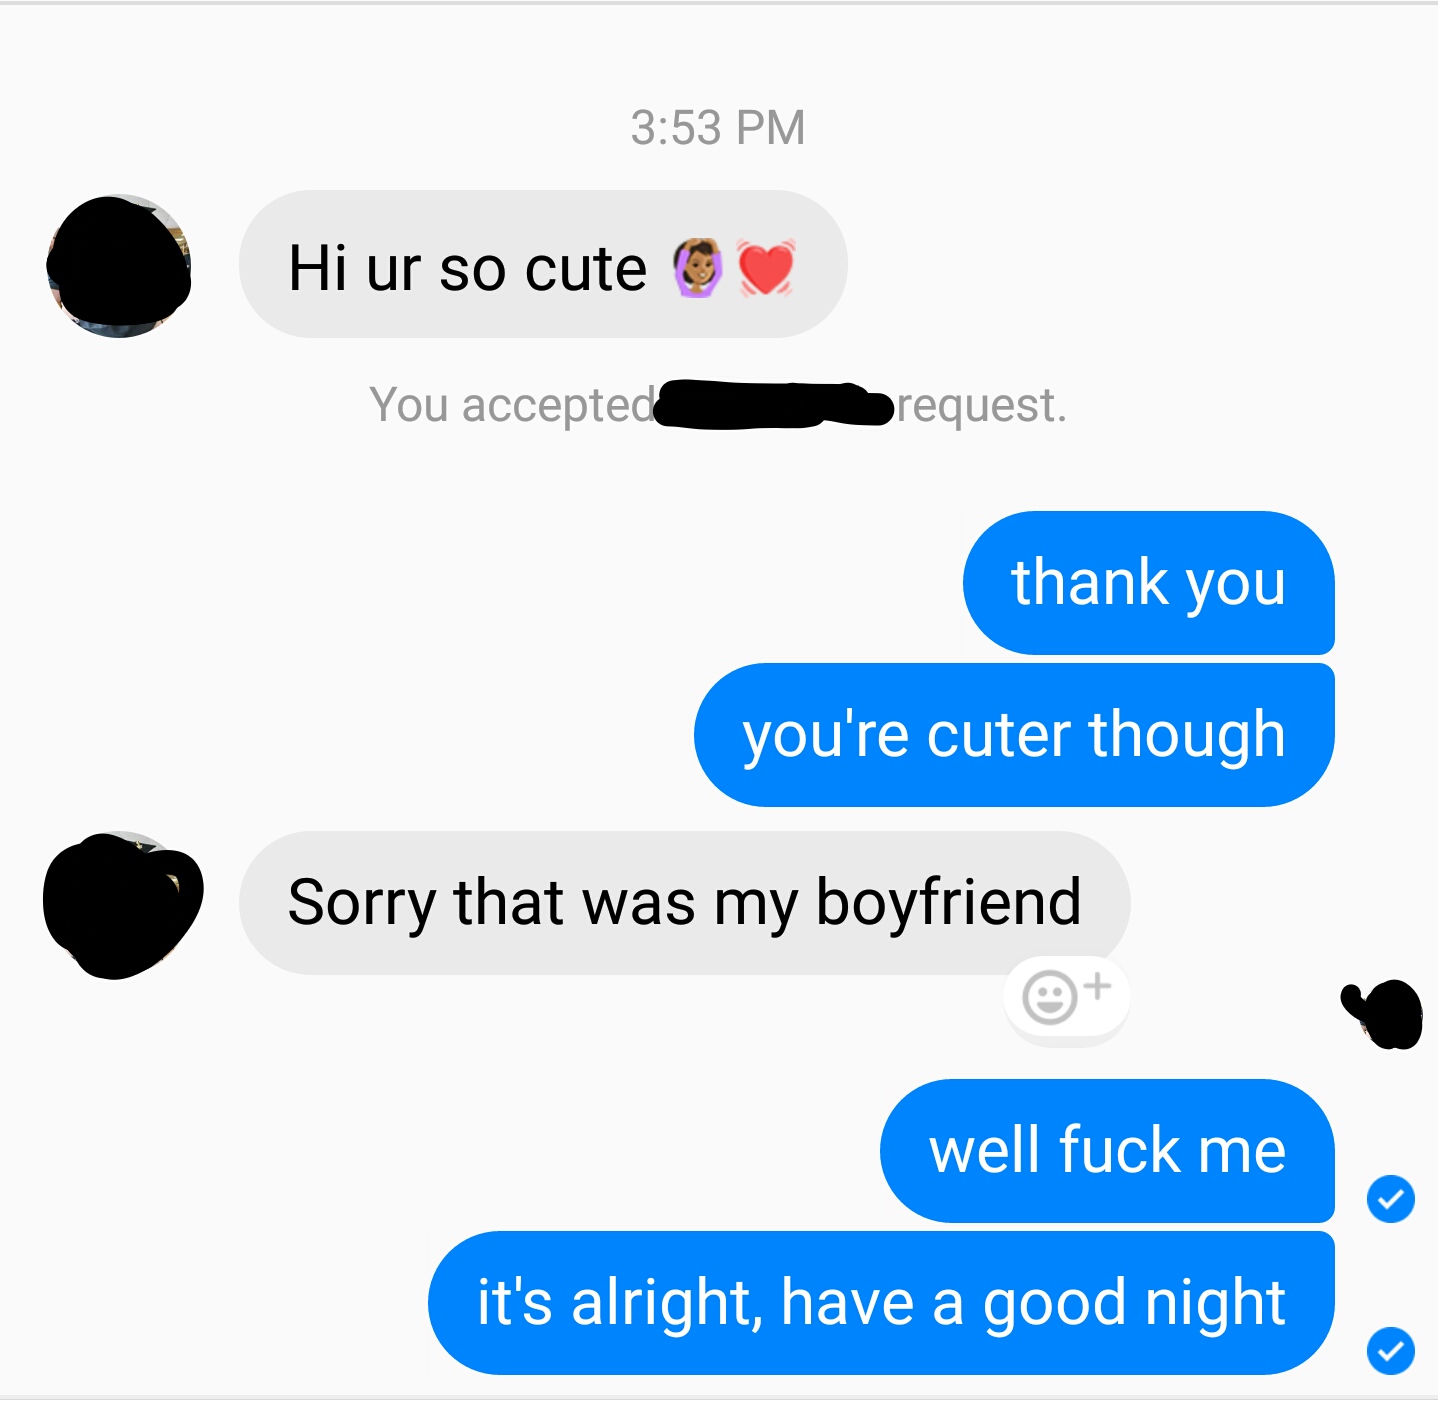 Chat of girl telling guy he is so cute and then girl apologizes and says it was her boyfriend sending that out.